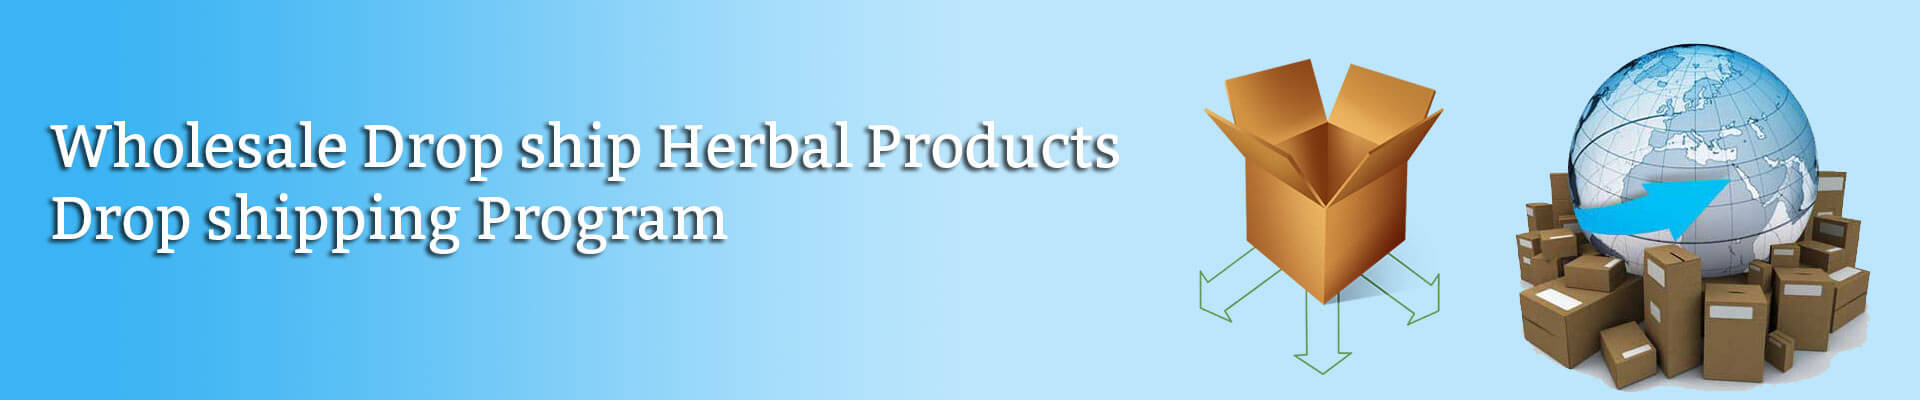 Wholesale Drop ship Herbal Products